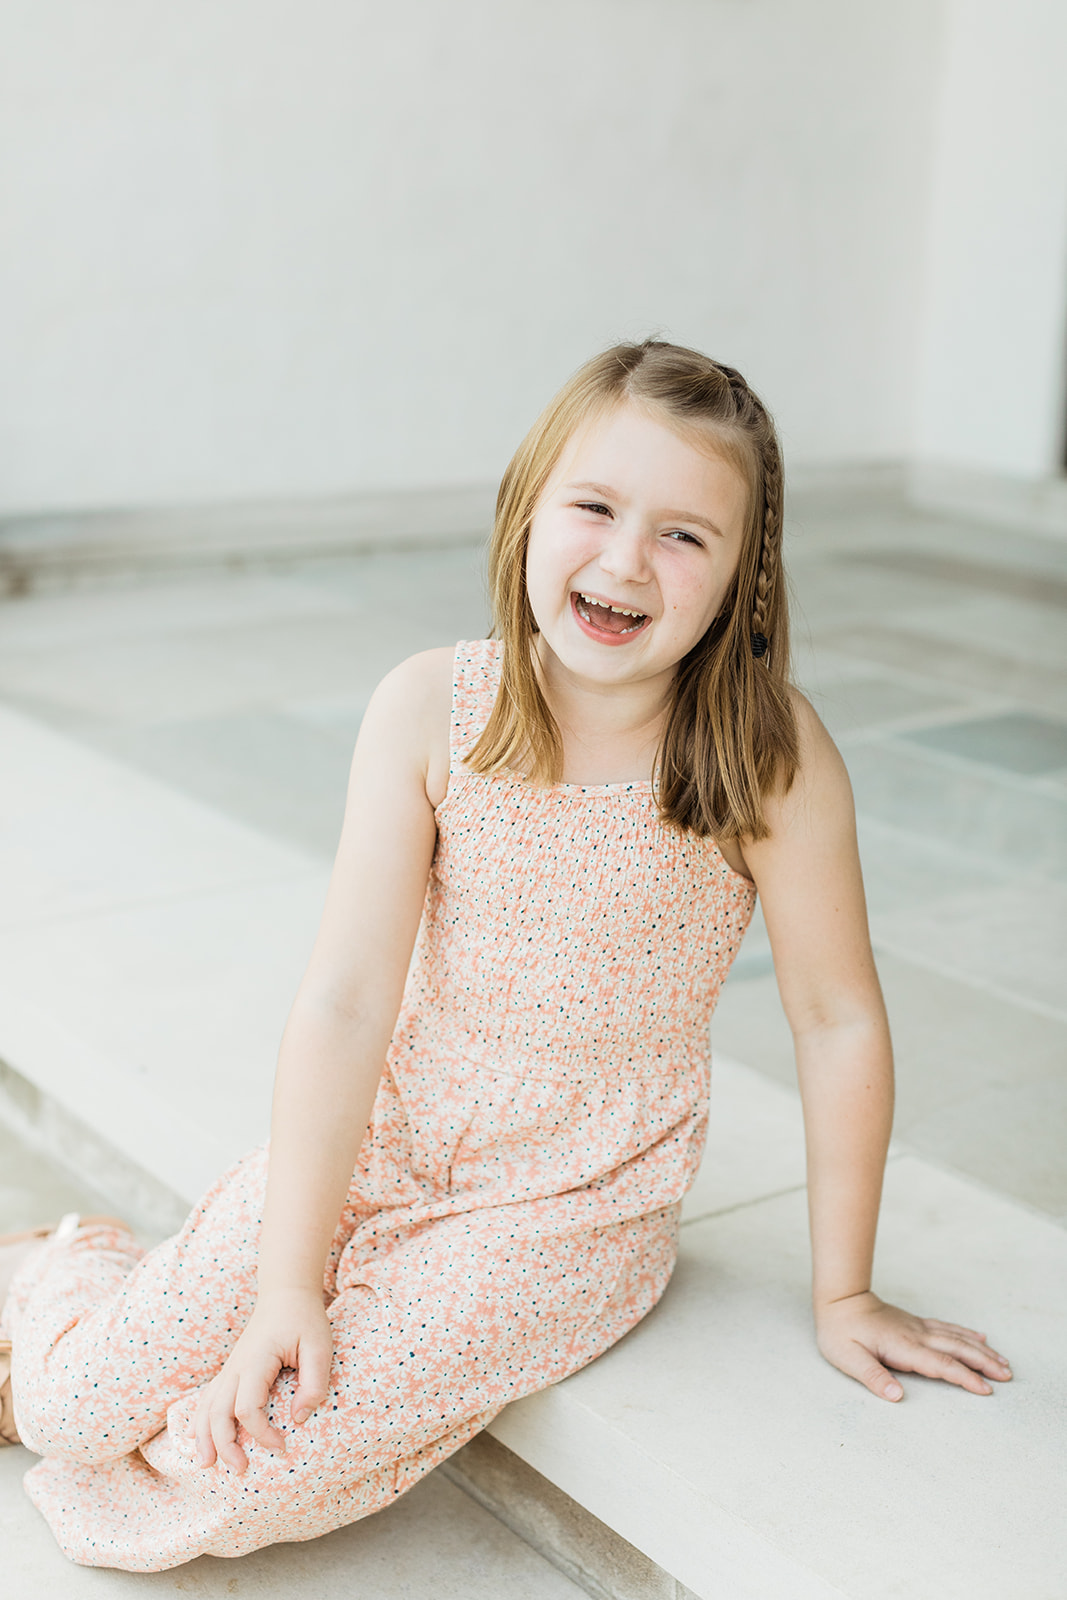 outdoor in-home family session in nashville tennessee. little girl smiling